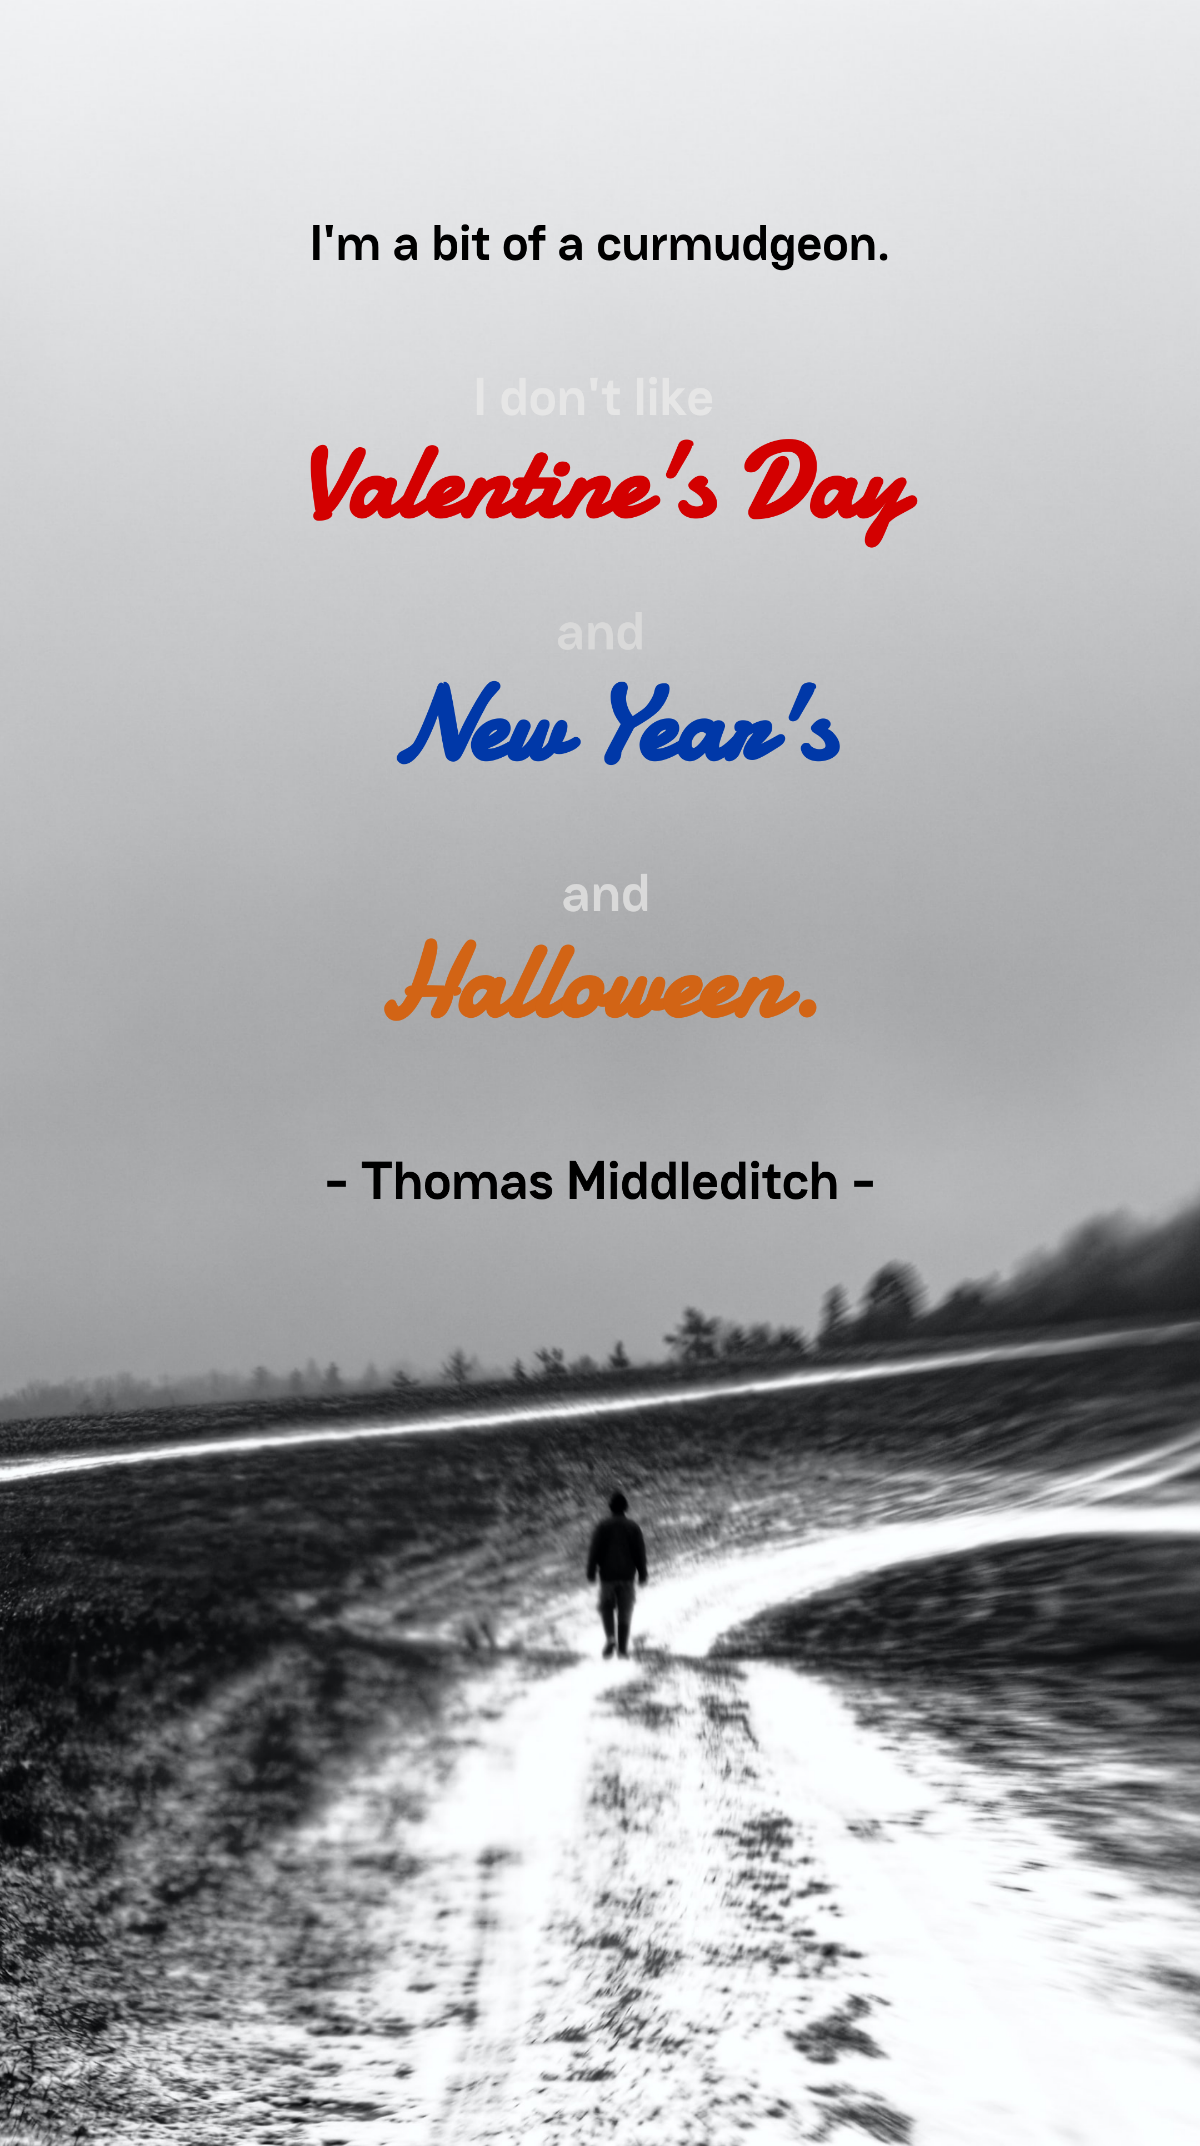 Thomas Middleditch - I'm a bit of a curmudgeon. I don't like Valentine's Day and New Year's and Halloween. Template